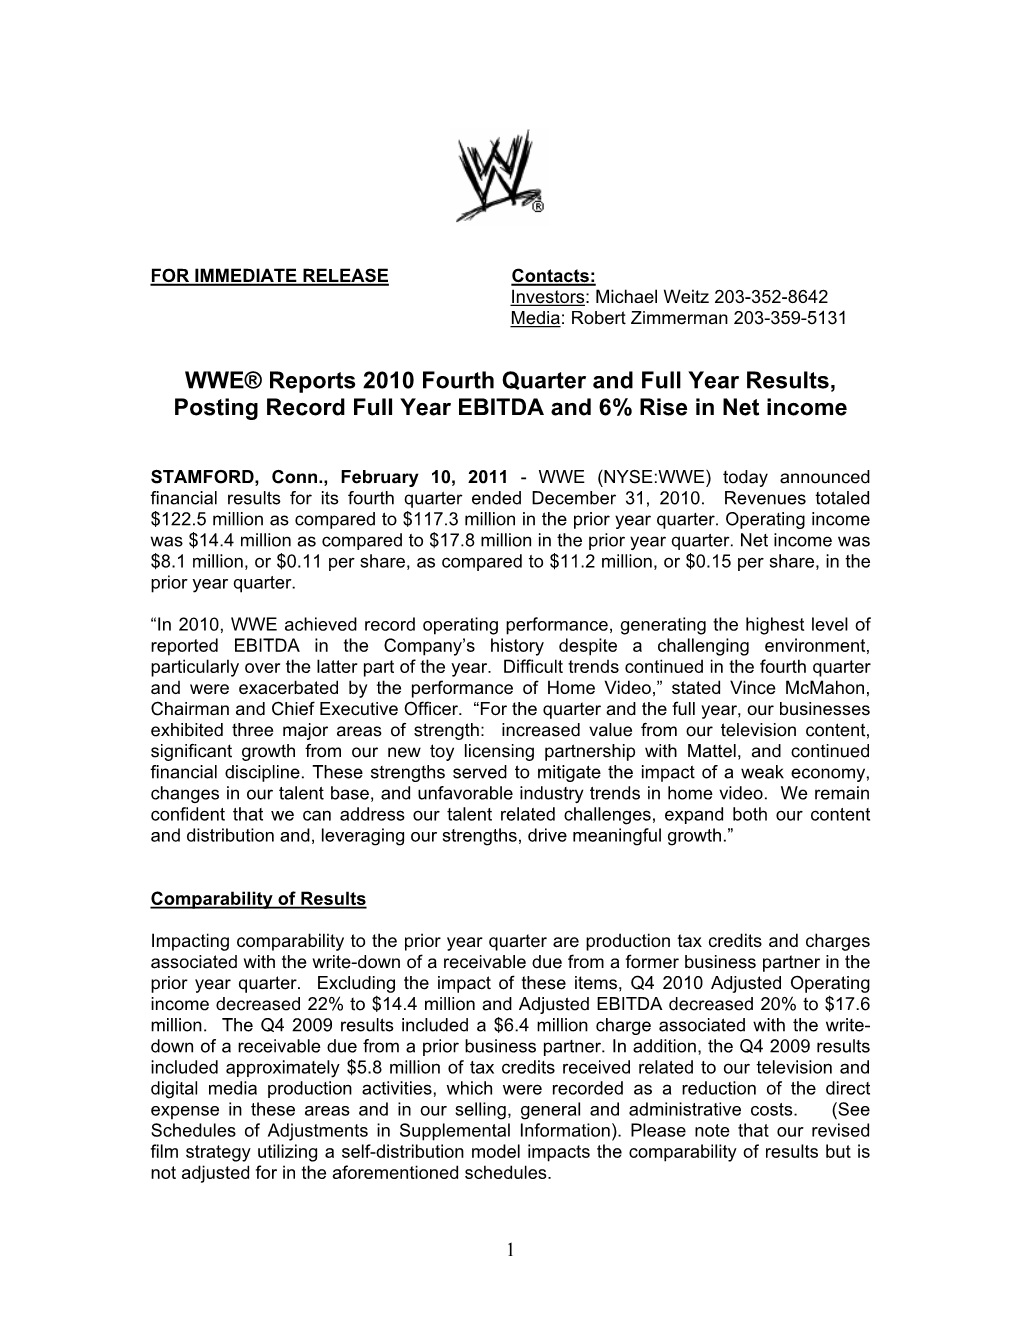 WWE® Reports 2010 Fourth Quarter and Full Year Results, Posting Record Full Year EBITDA and 6% Rise in Net Income